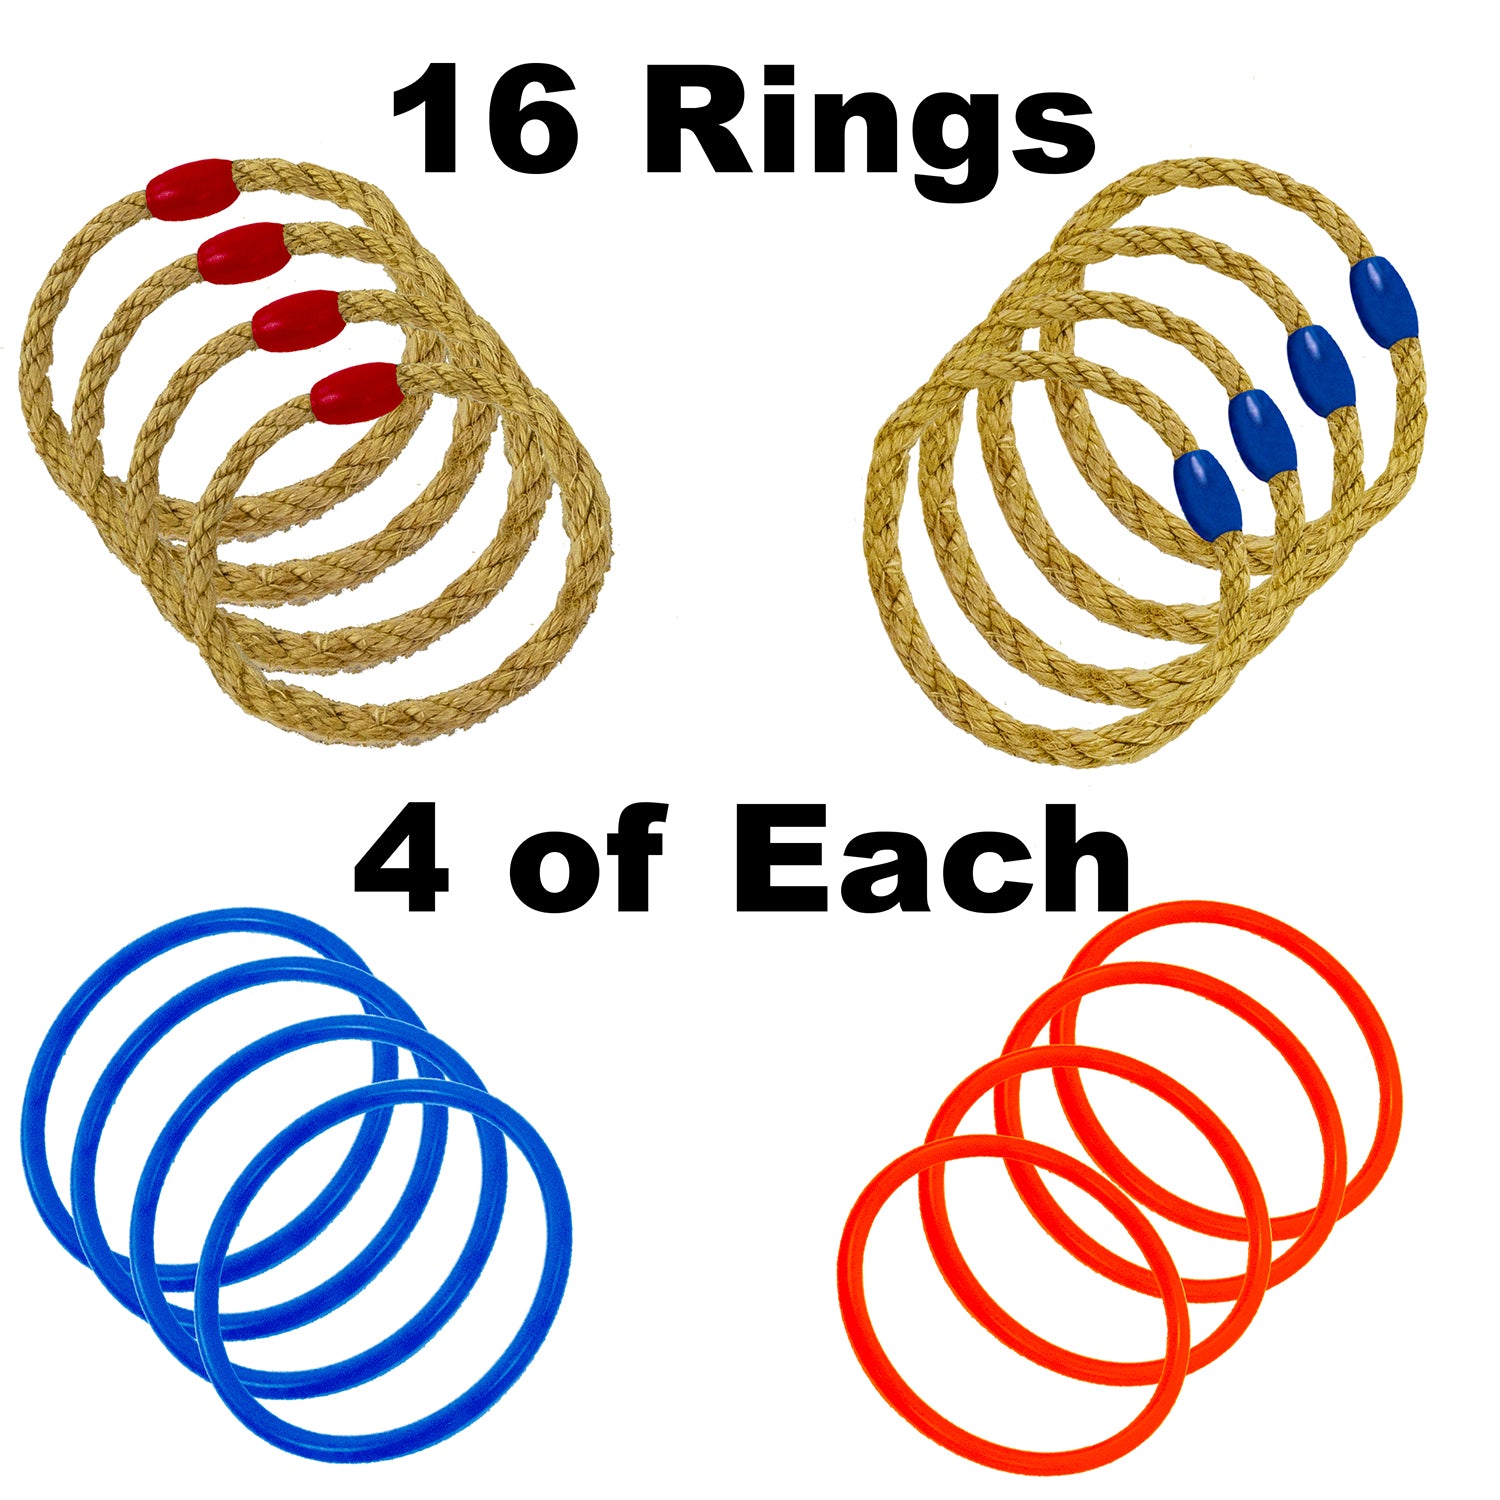 Funsparks Ring Toss comes with 16 rings